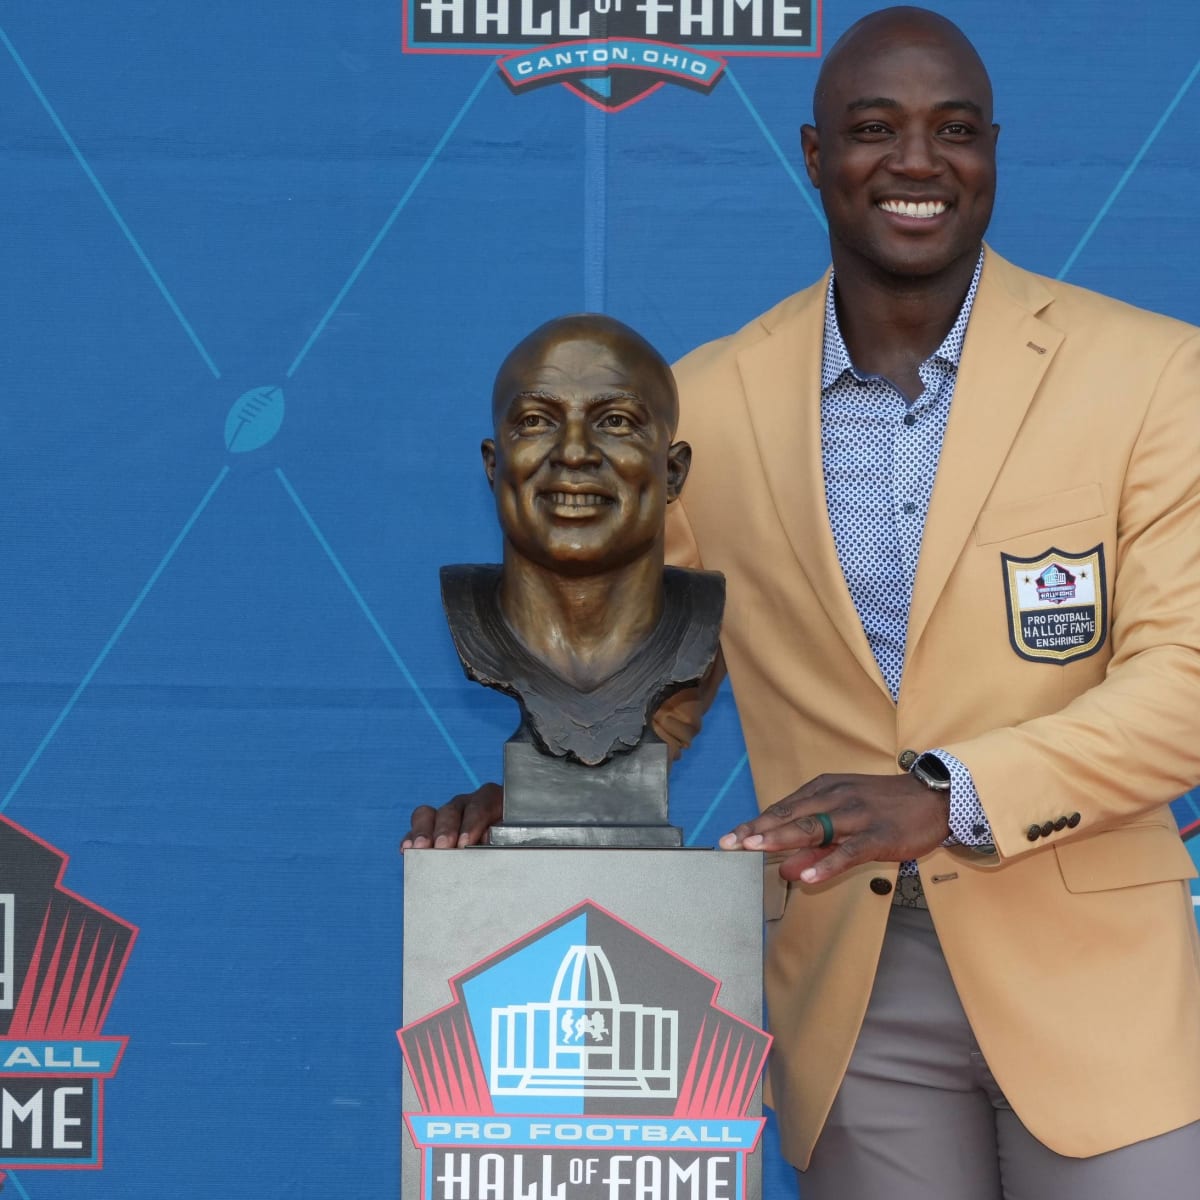 Cowboys Fans Are Fuming Over DeMarcus Ware's Hall of Fame Display